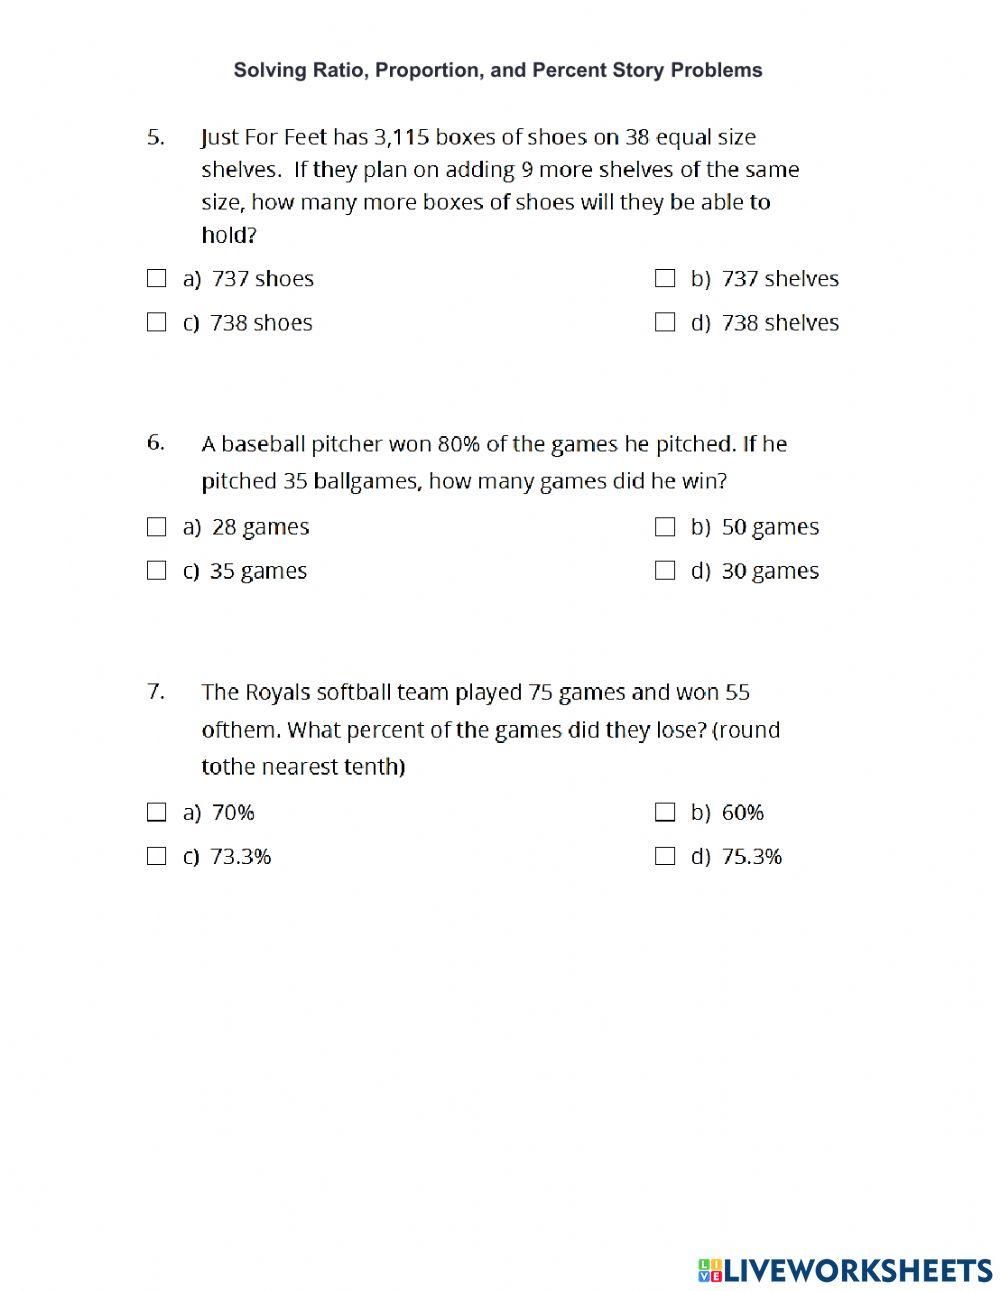 Solving Ratio, Proportion, and Percent Story Problems